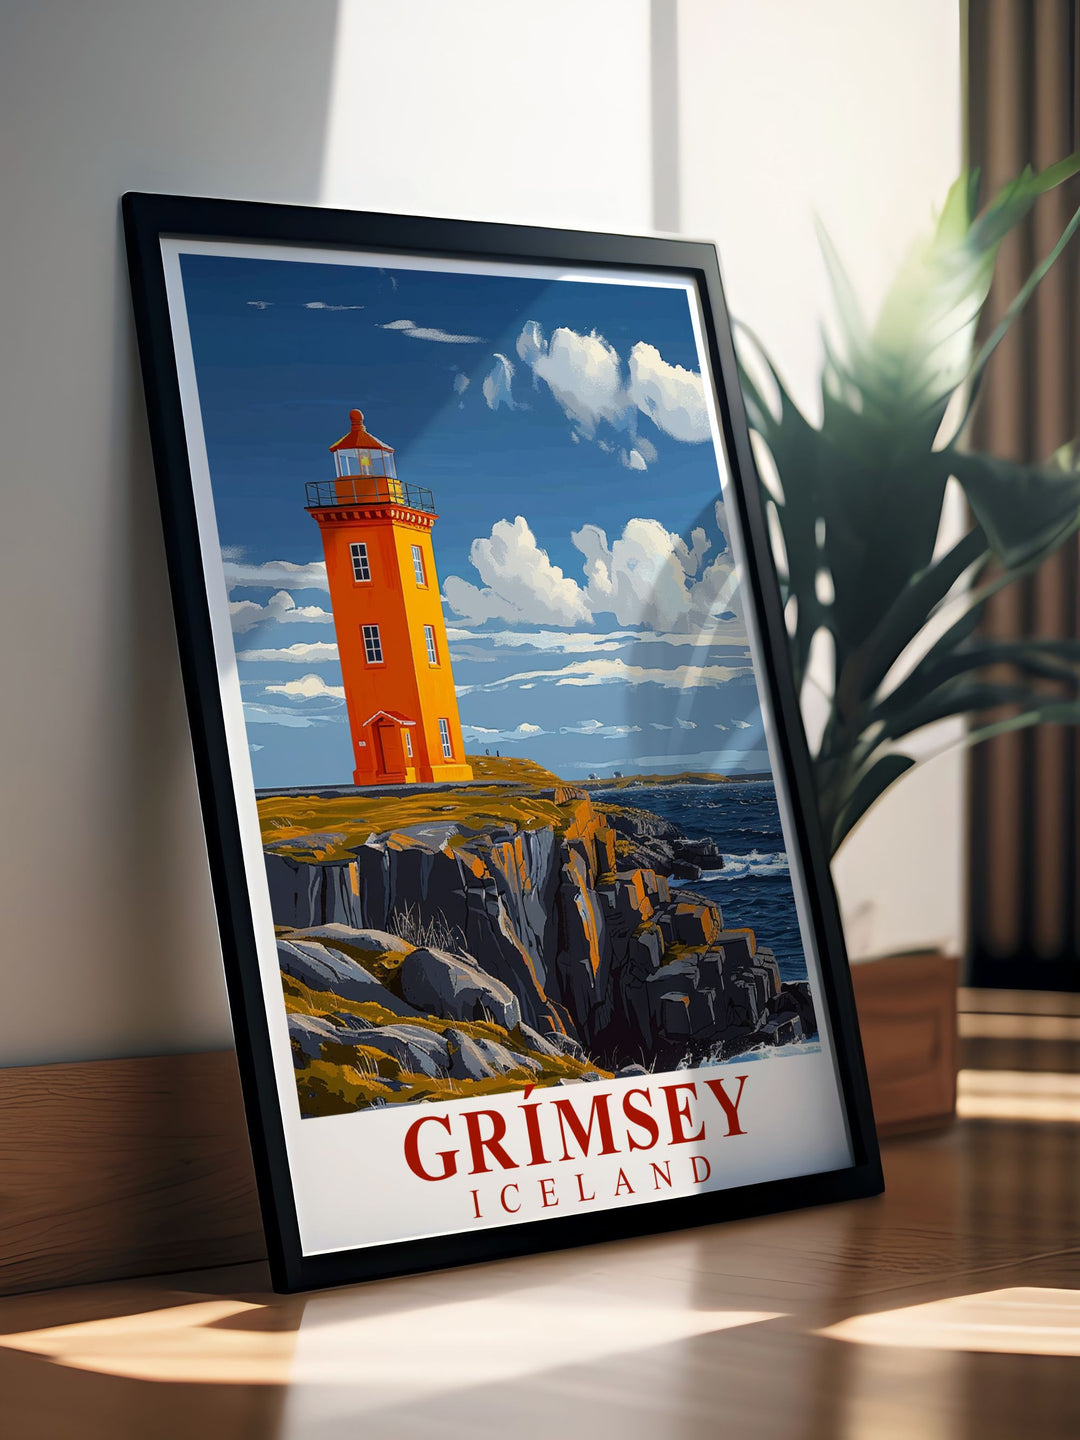 Featuring the vibrant wildlife of Grimsey, this art print captures the lively puffins and stunning landscapes, bringing the islands natural beauty and biodiversity into your home decor.